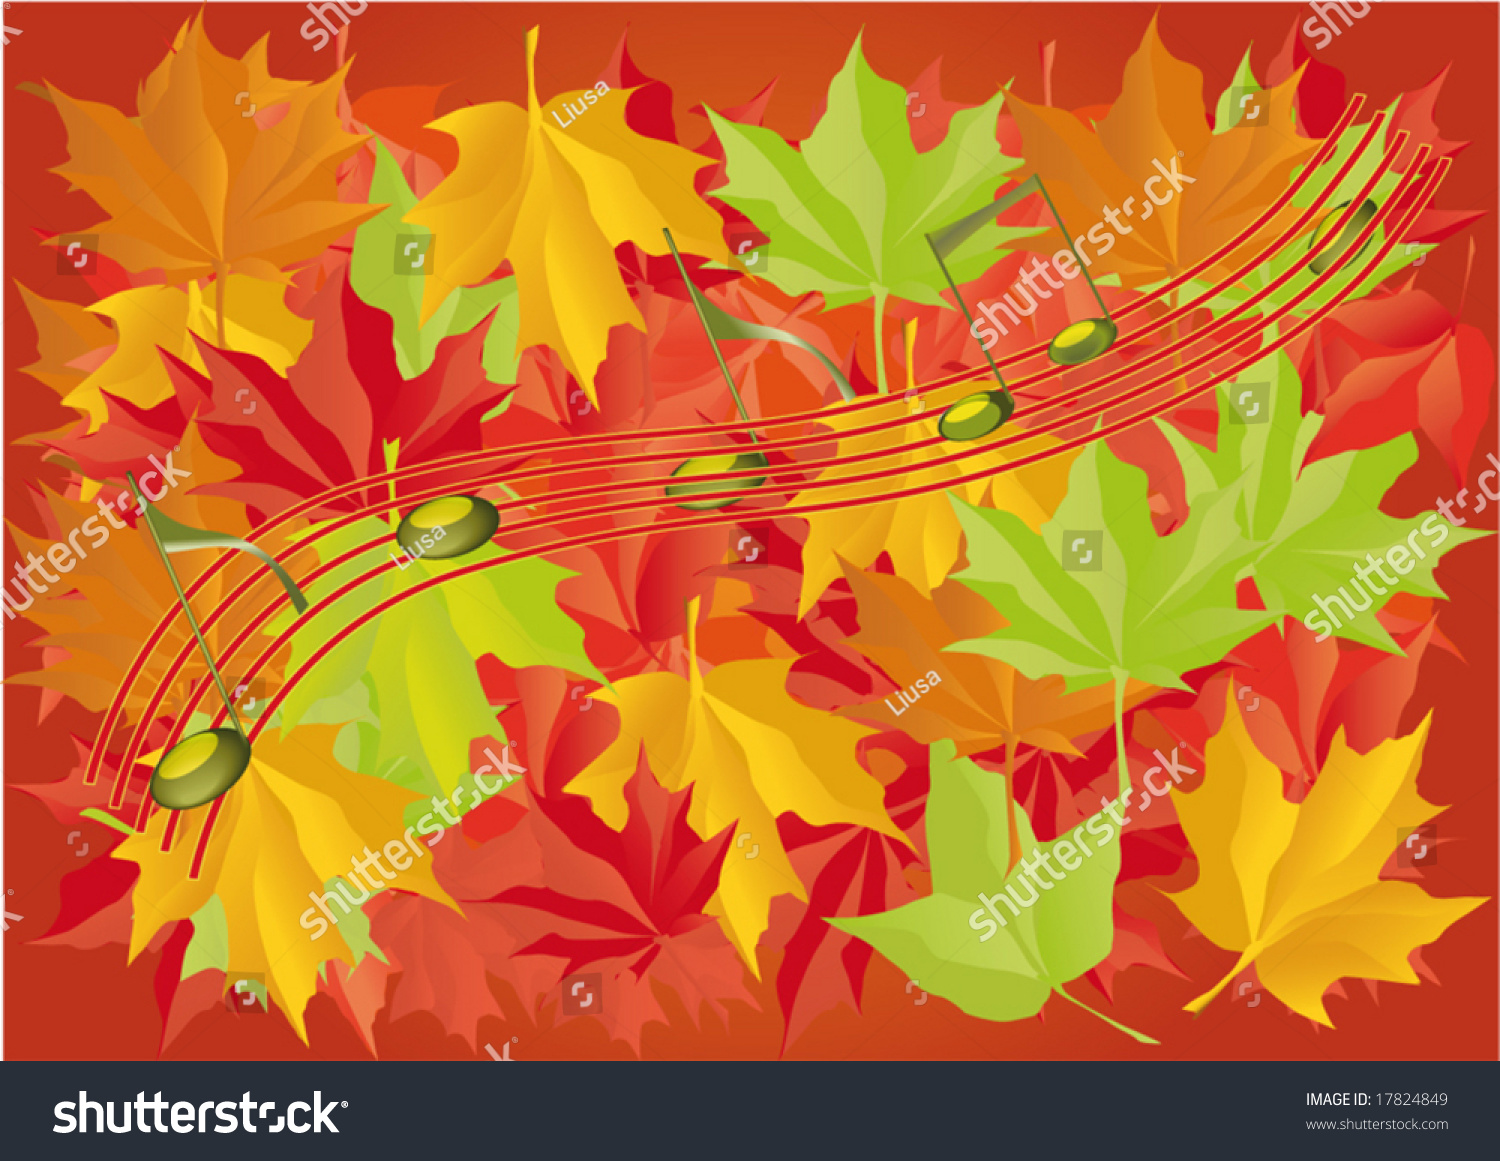 Autumn Leaves Musical Notes Stock Vector (Royalty Free) 17824849 ...